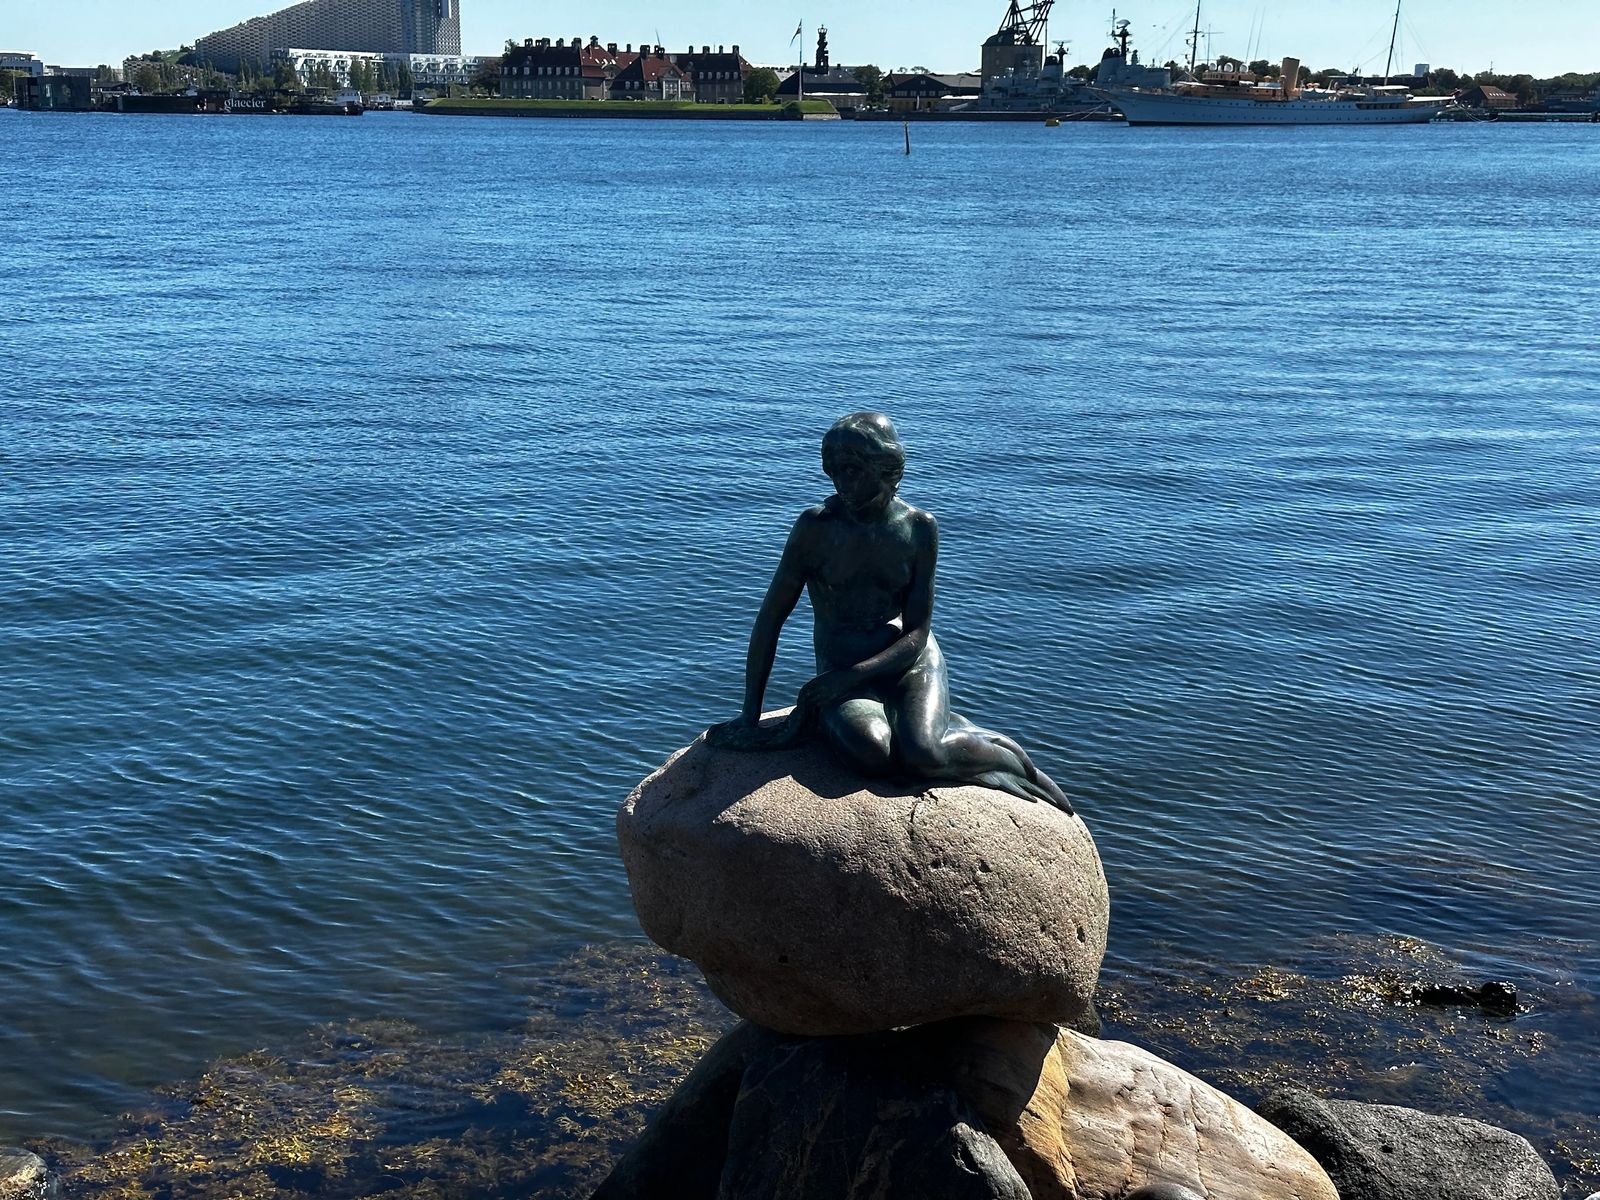 Little Mermaid Statue - unique things to see in Copenhagen